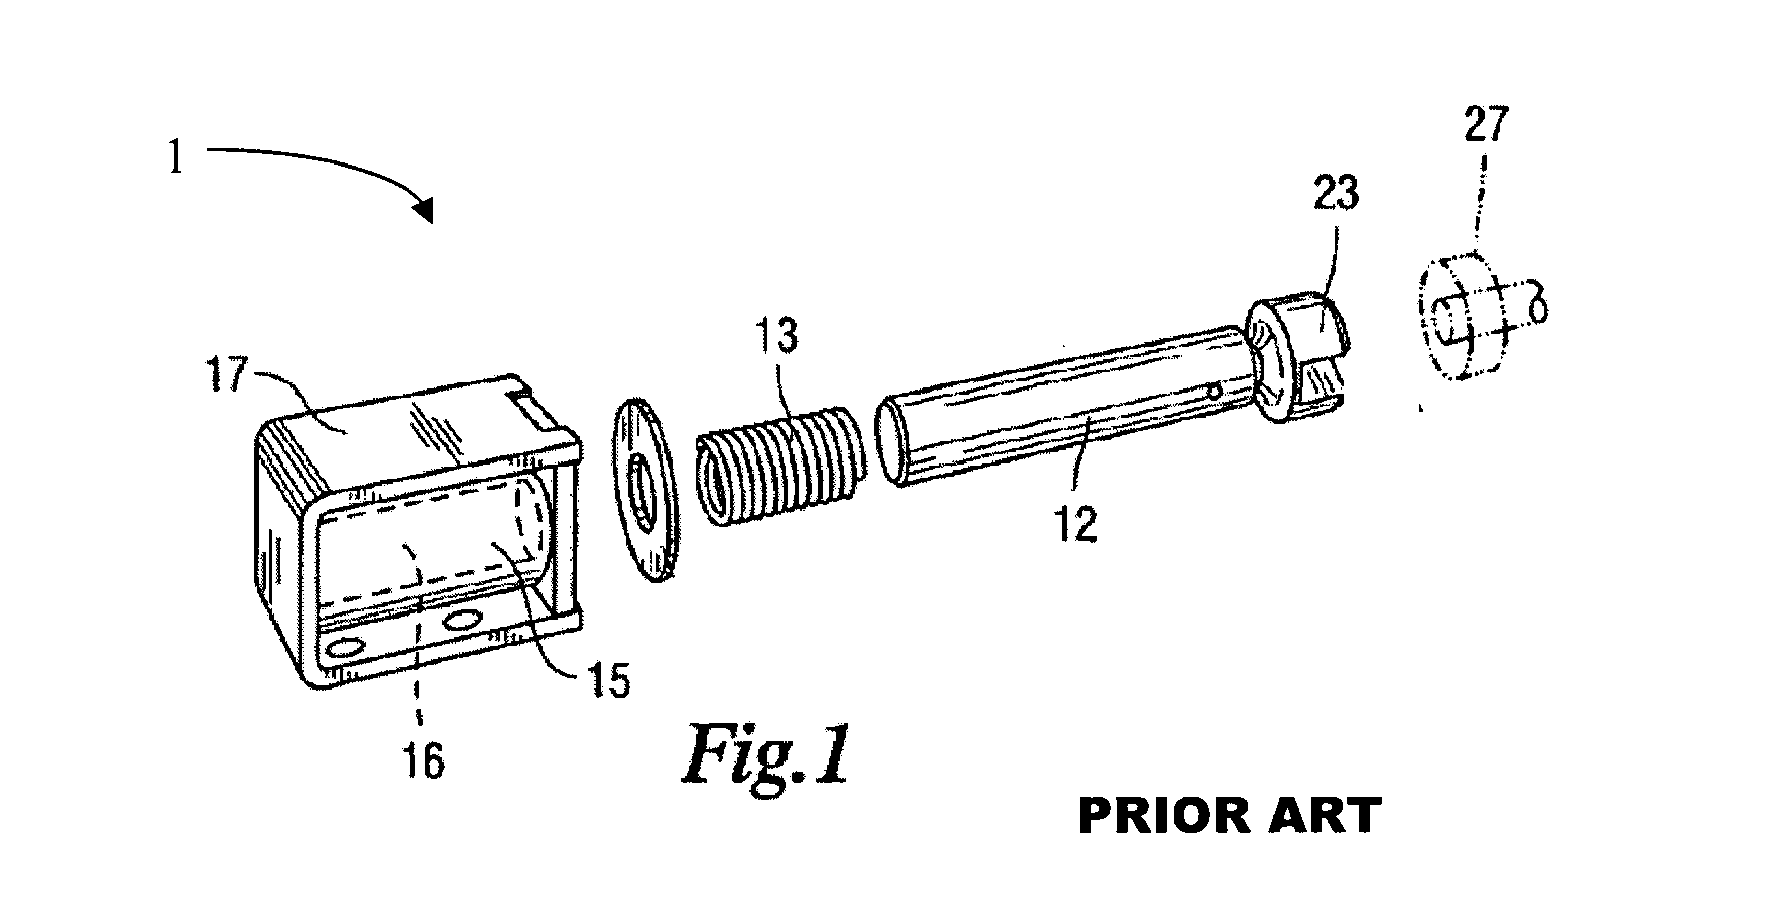 Electrically assisted safing of a linear actuator to provide shock tolerance